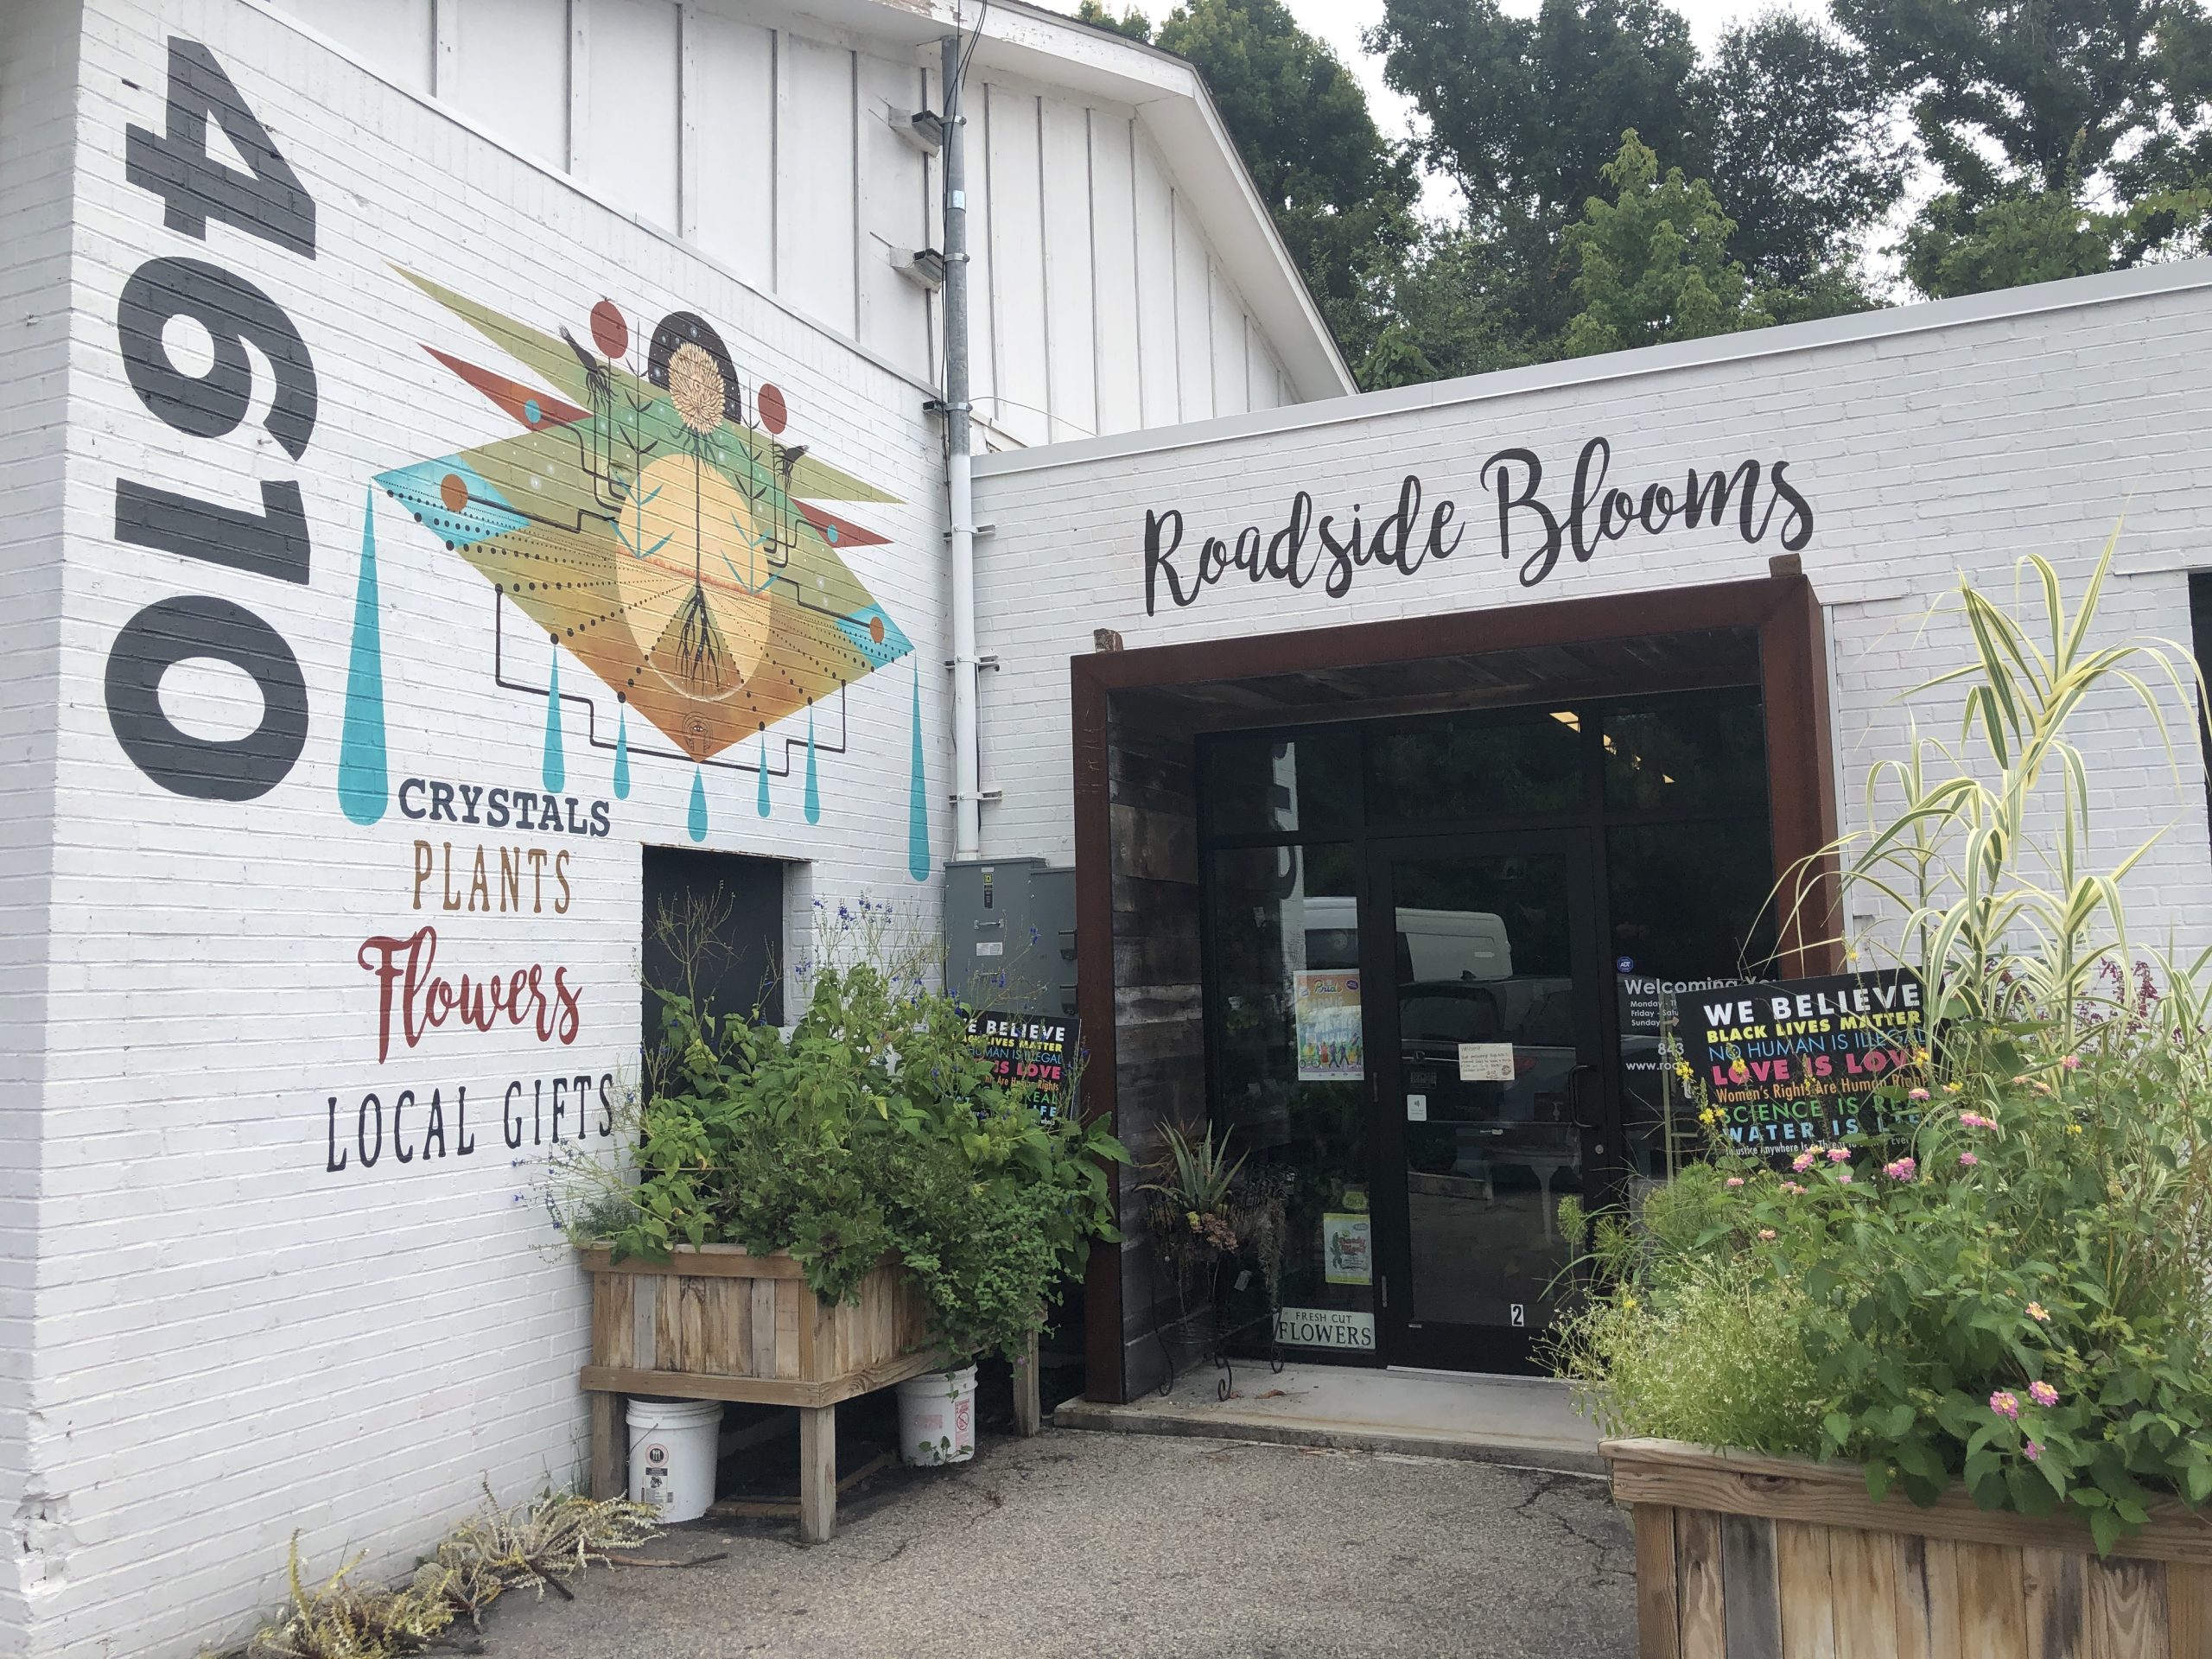 Roadside Blooms - More than just a Flower Shop - Real Deal with Neil